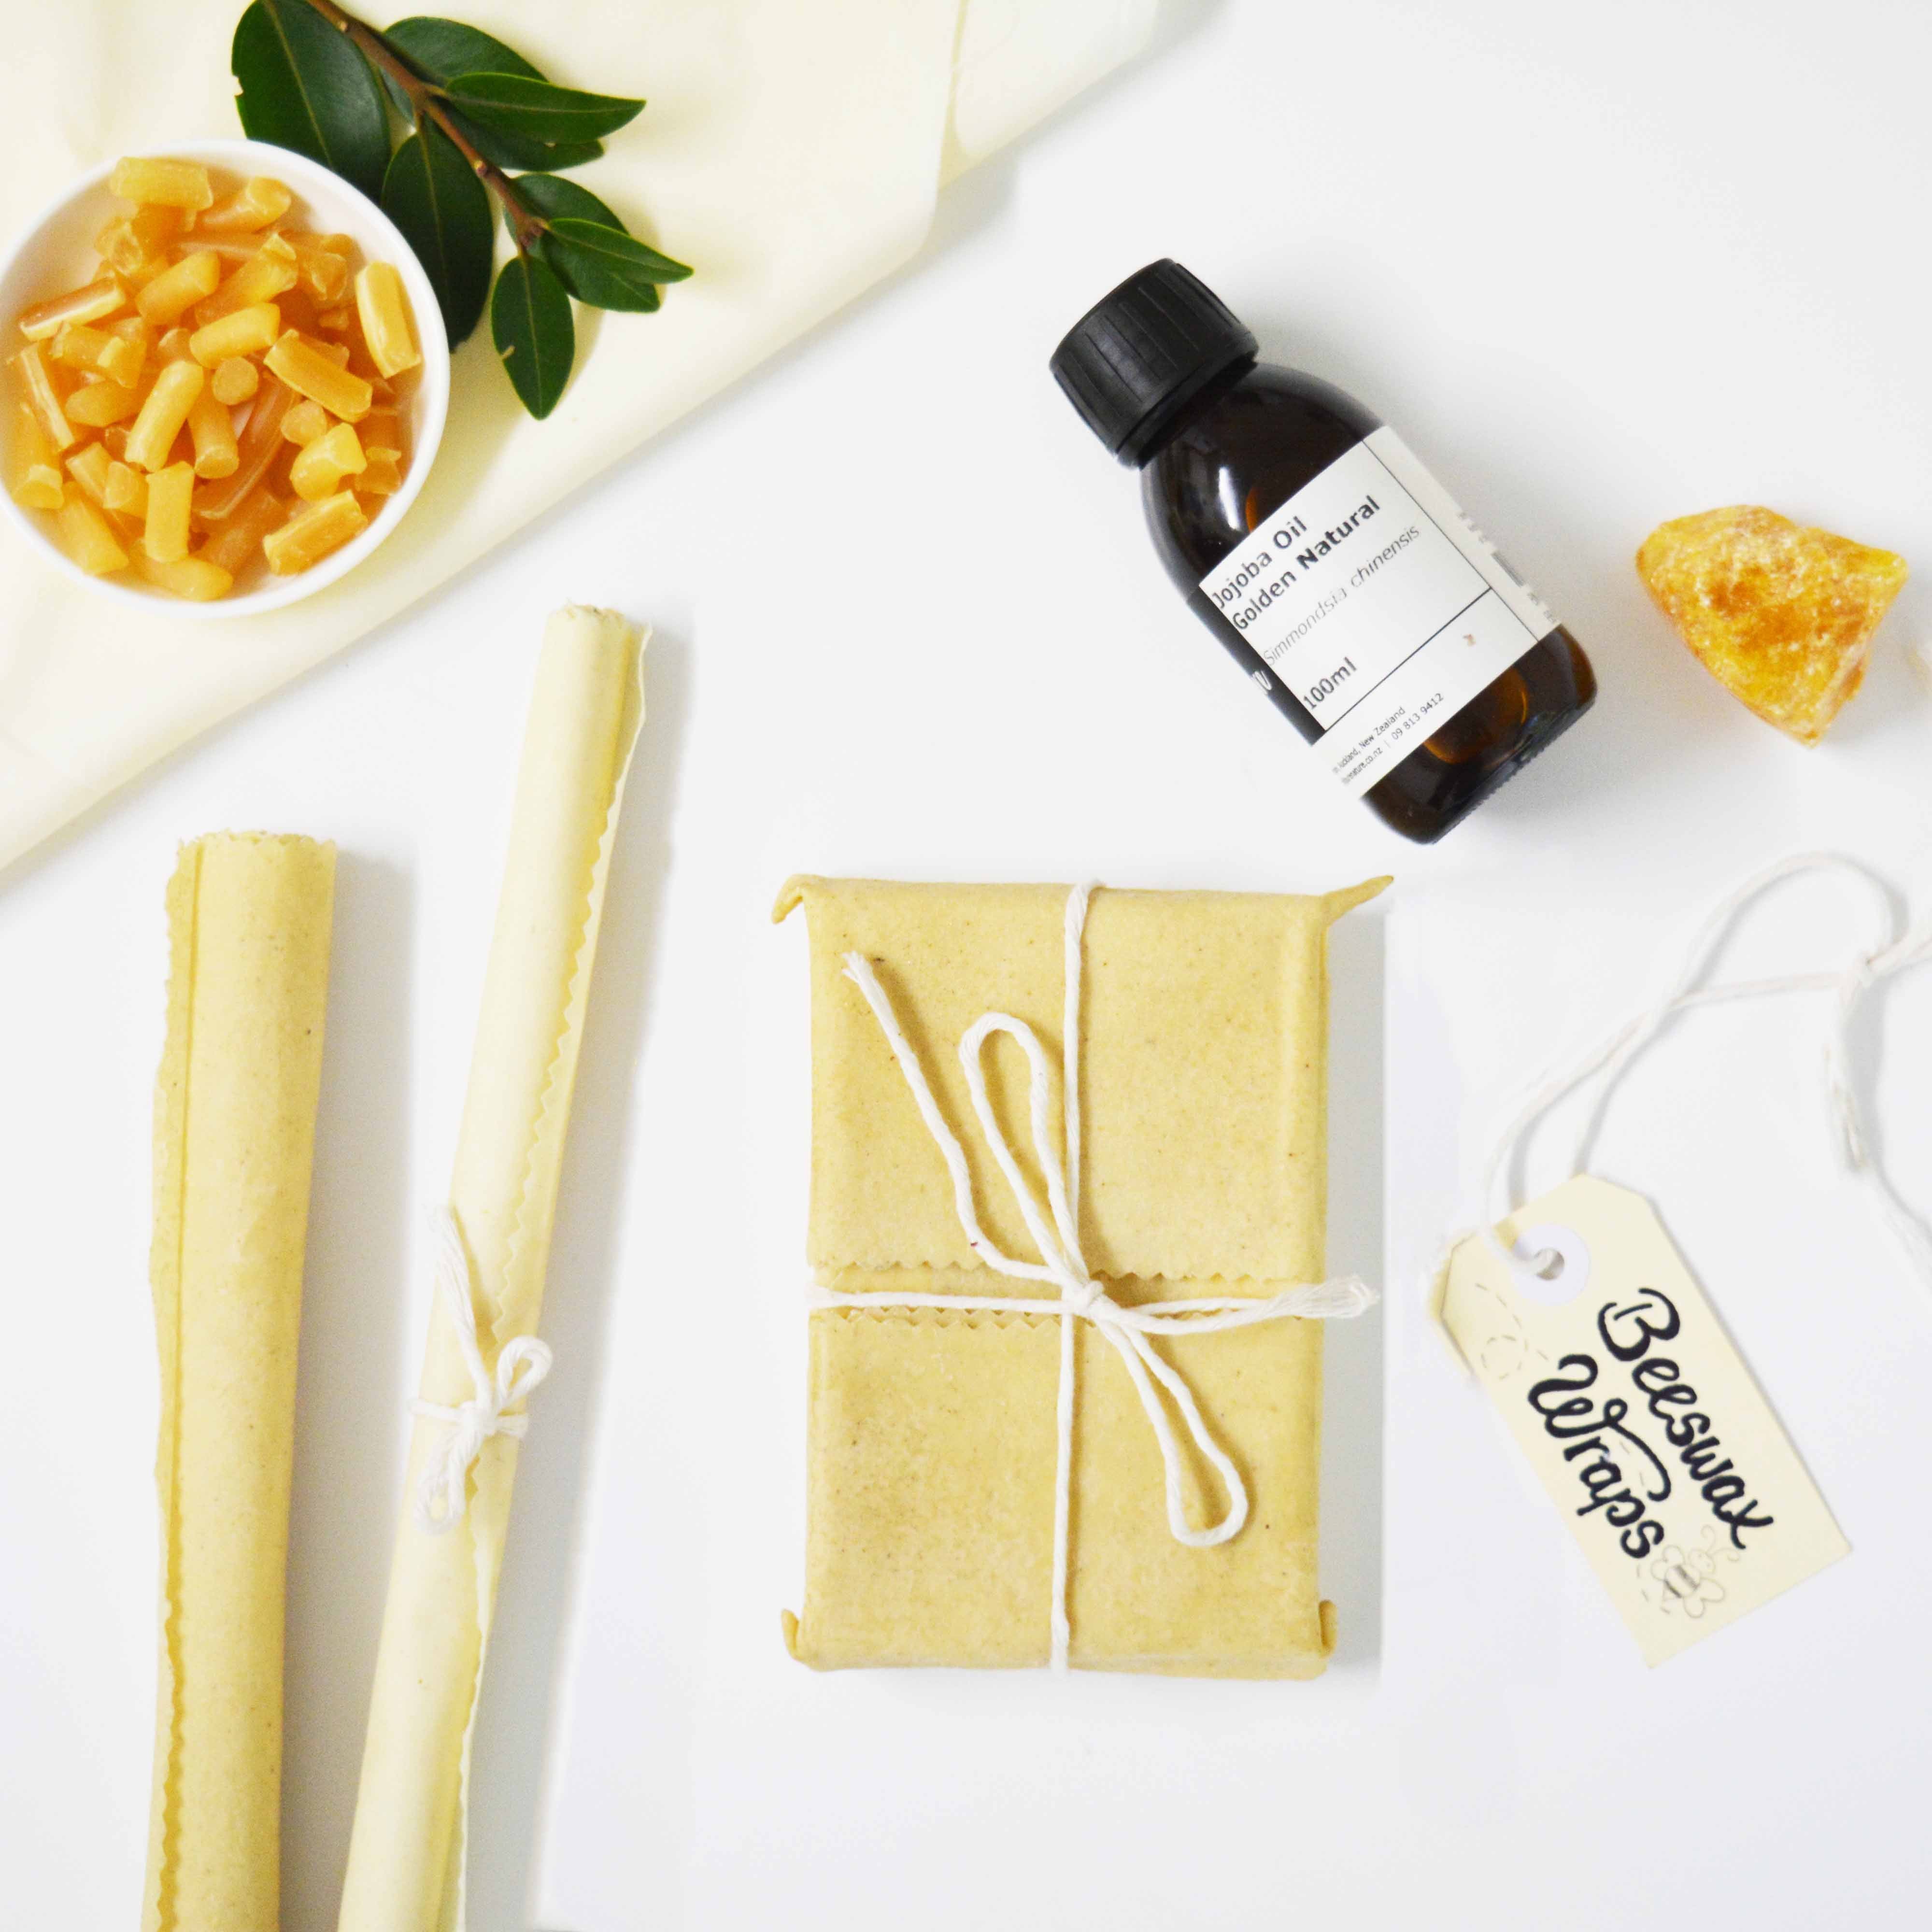 How to make Beeswax Food Wraps with Pine Rosin (includes recipe) 